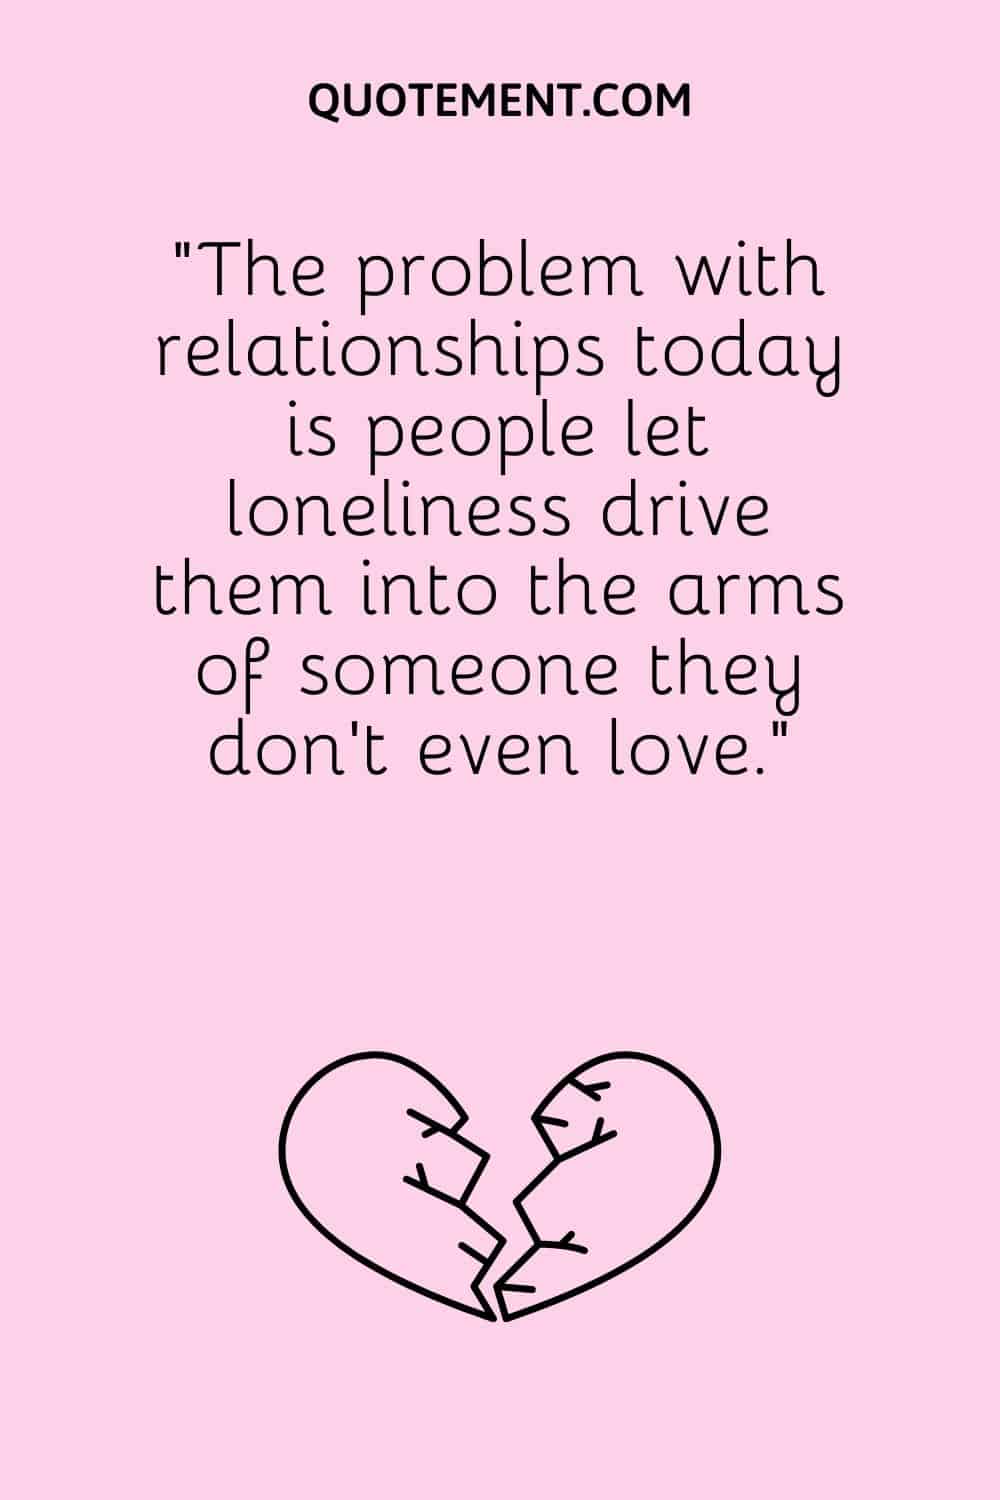 “The problem with relationships today is people let loneliness drive them into the arms of someone they don’t even love.”